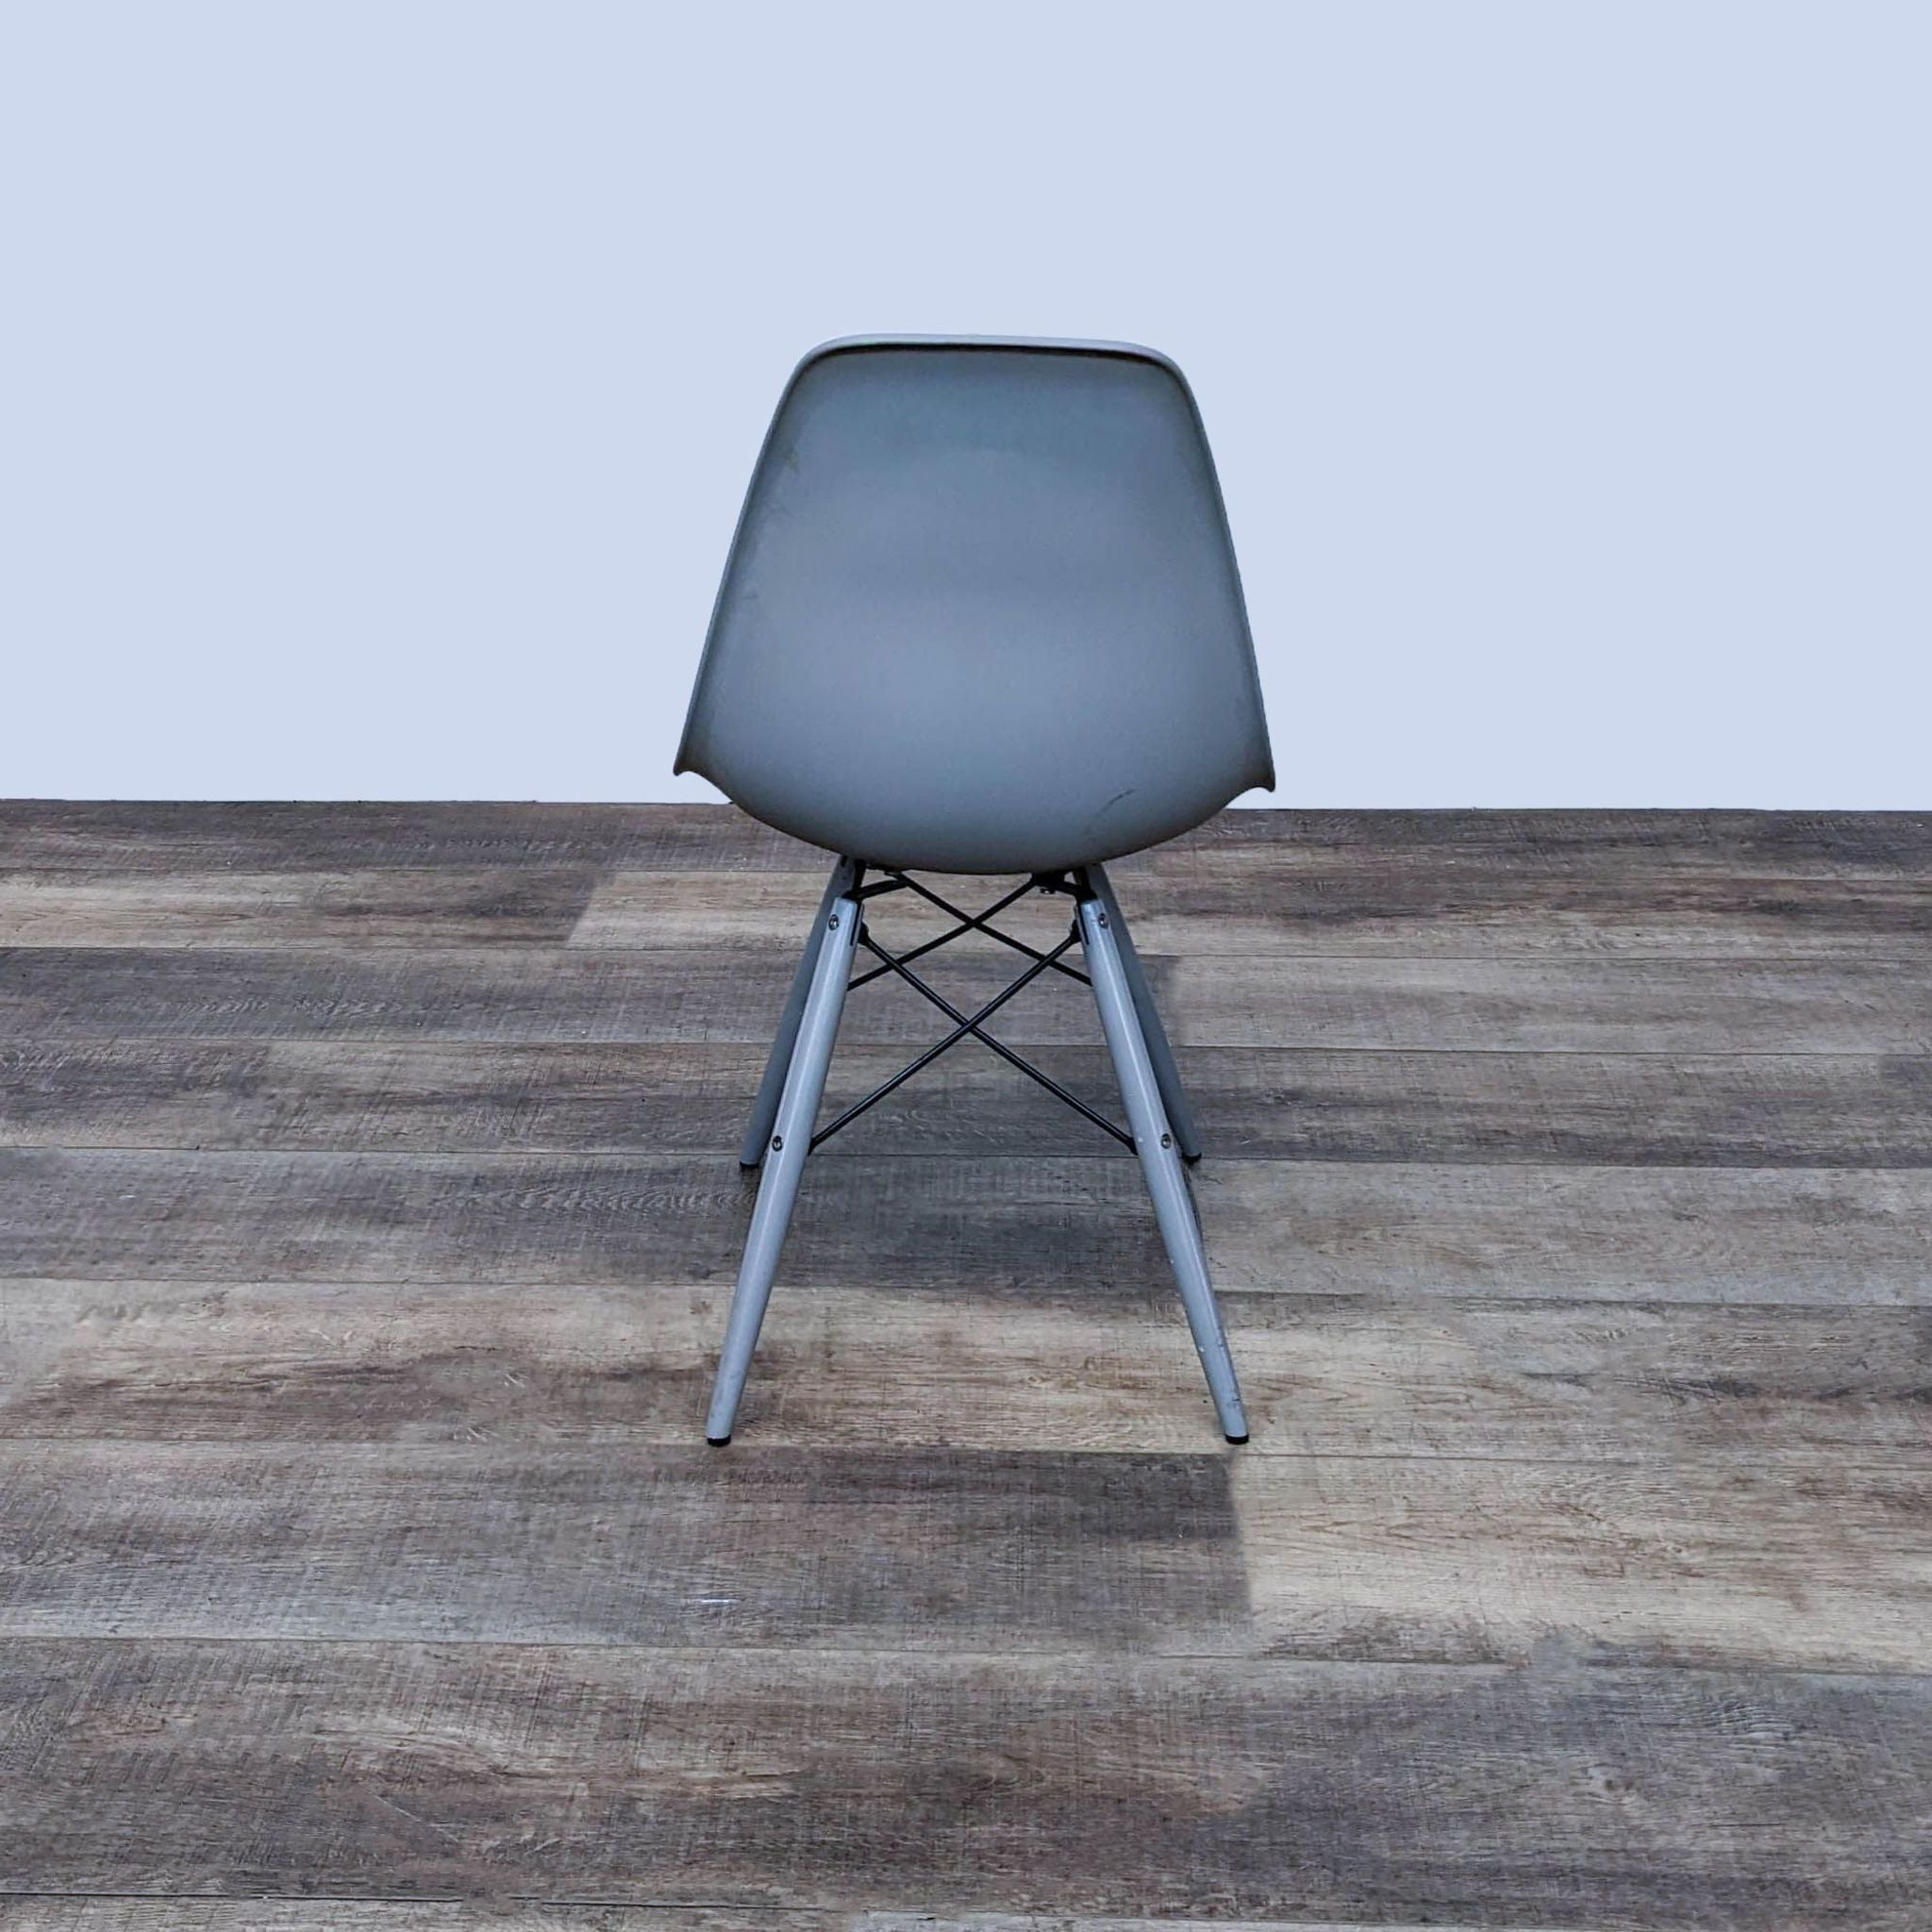 Reperch modern two-toned polypropylene side chair with an Eiffel-style base, placed on a wooden floor.